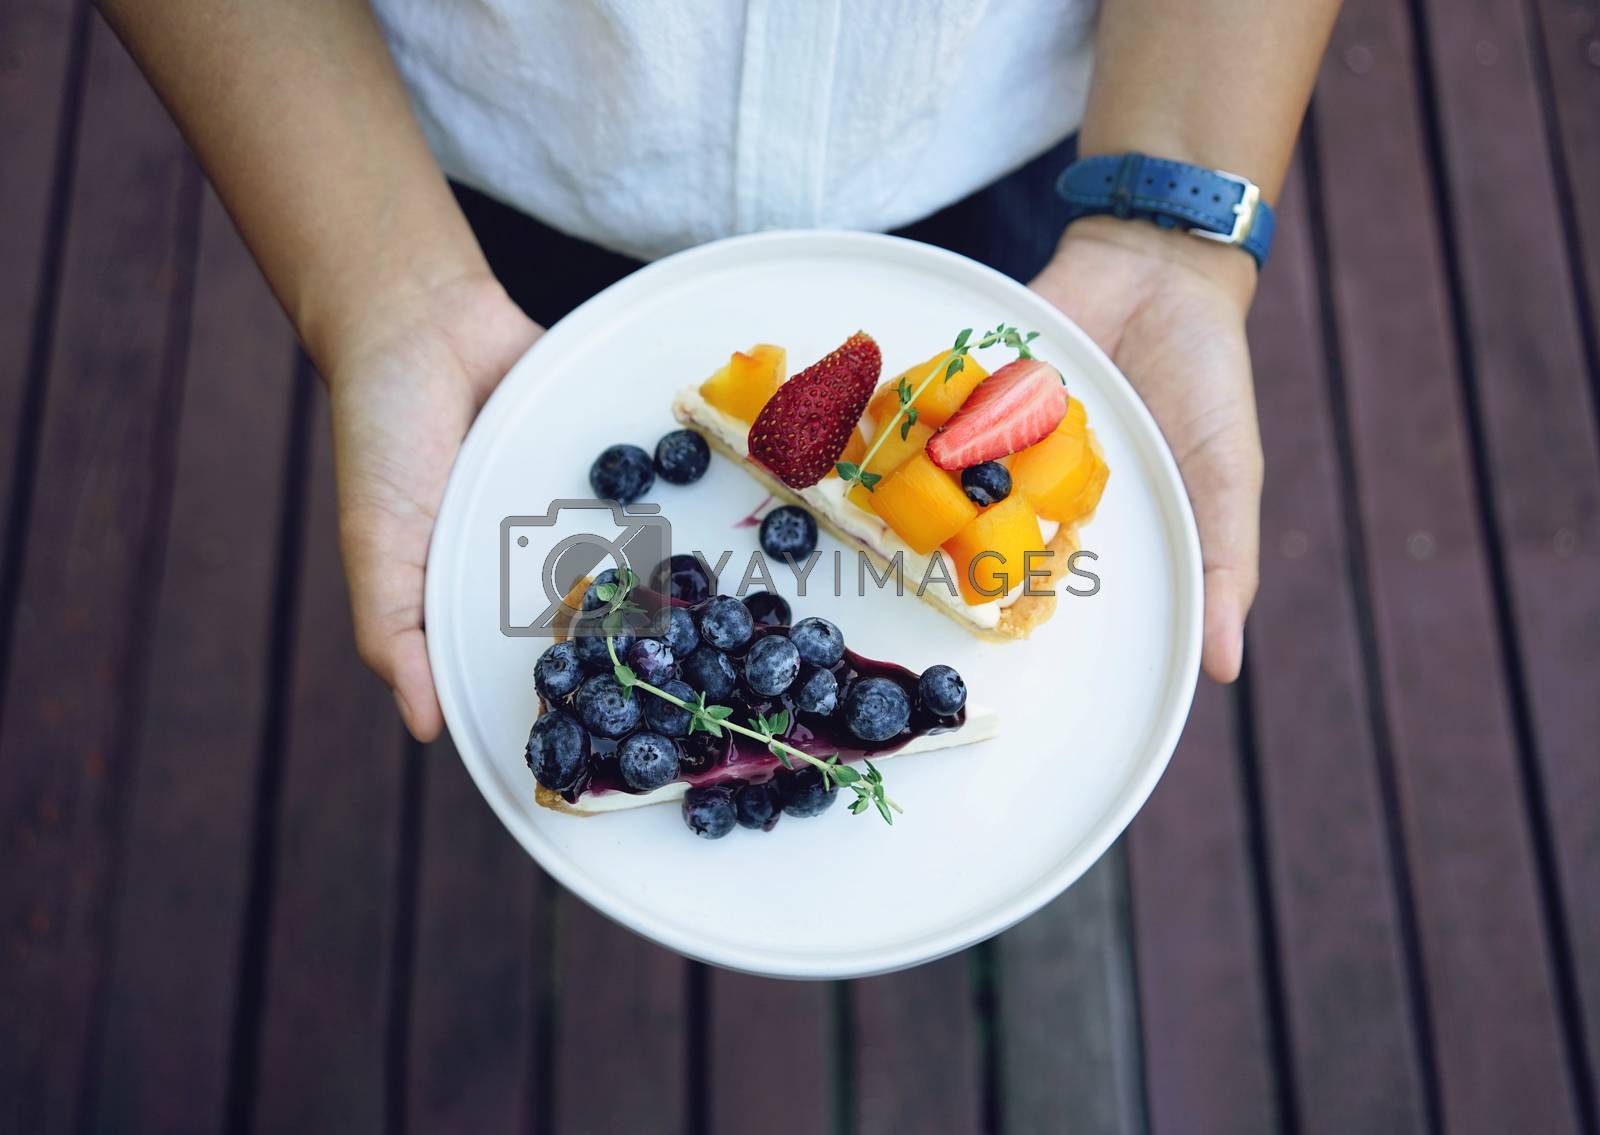 Royalty free image of Close up woman hands holding plate of blueberry pie and mango wi by nuchylee